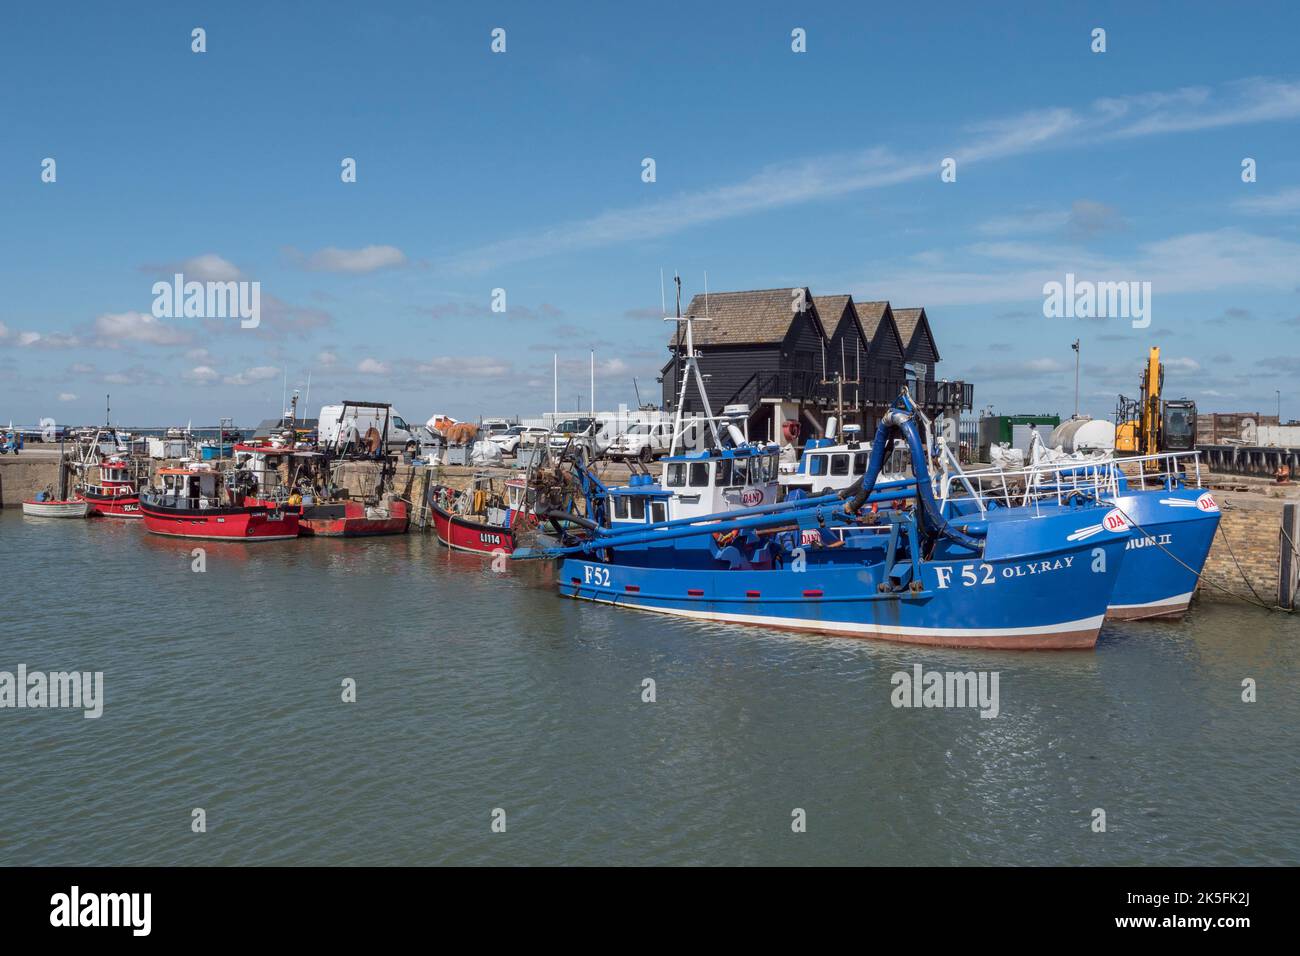 General view of fishing boats (F52 Oly Ray) in Whitstable Harbour, Whitstable, Kent, UK. Stock Photo